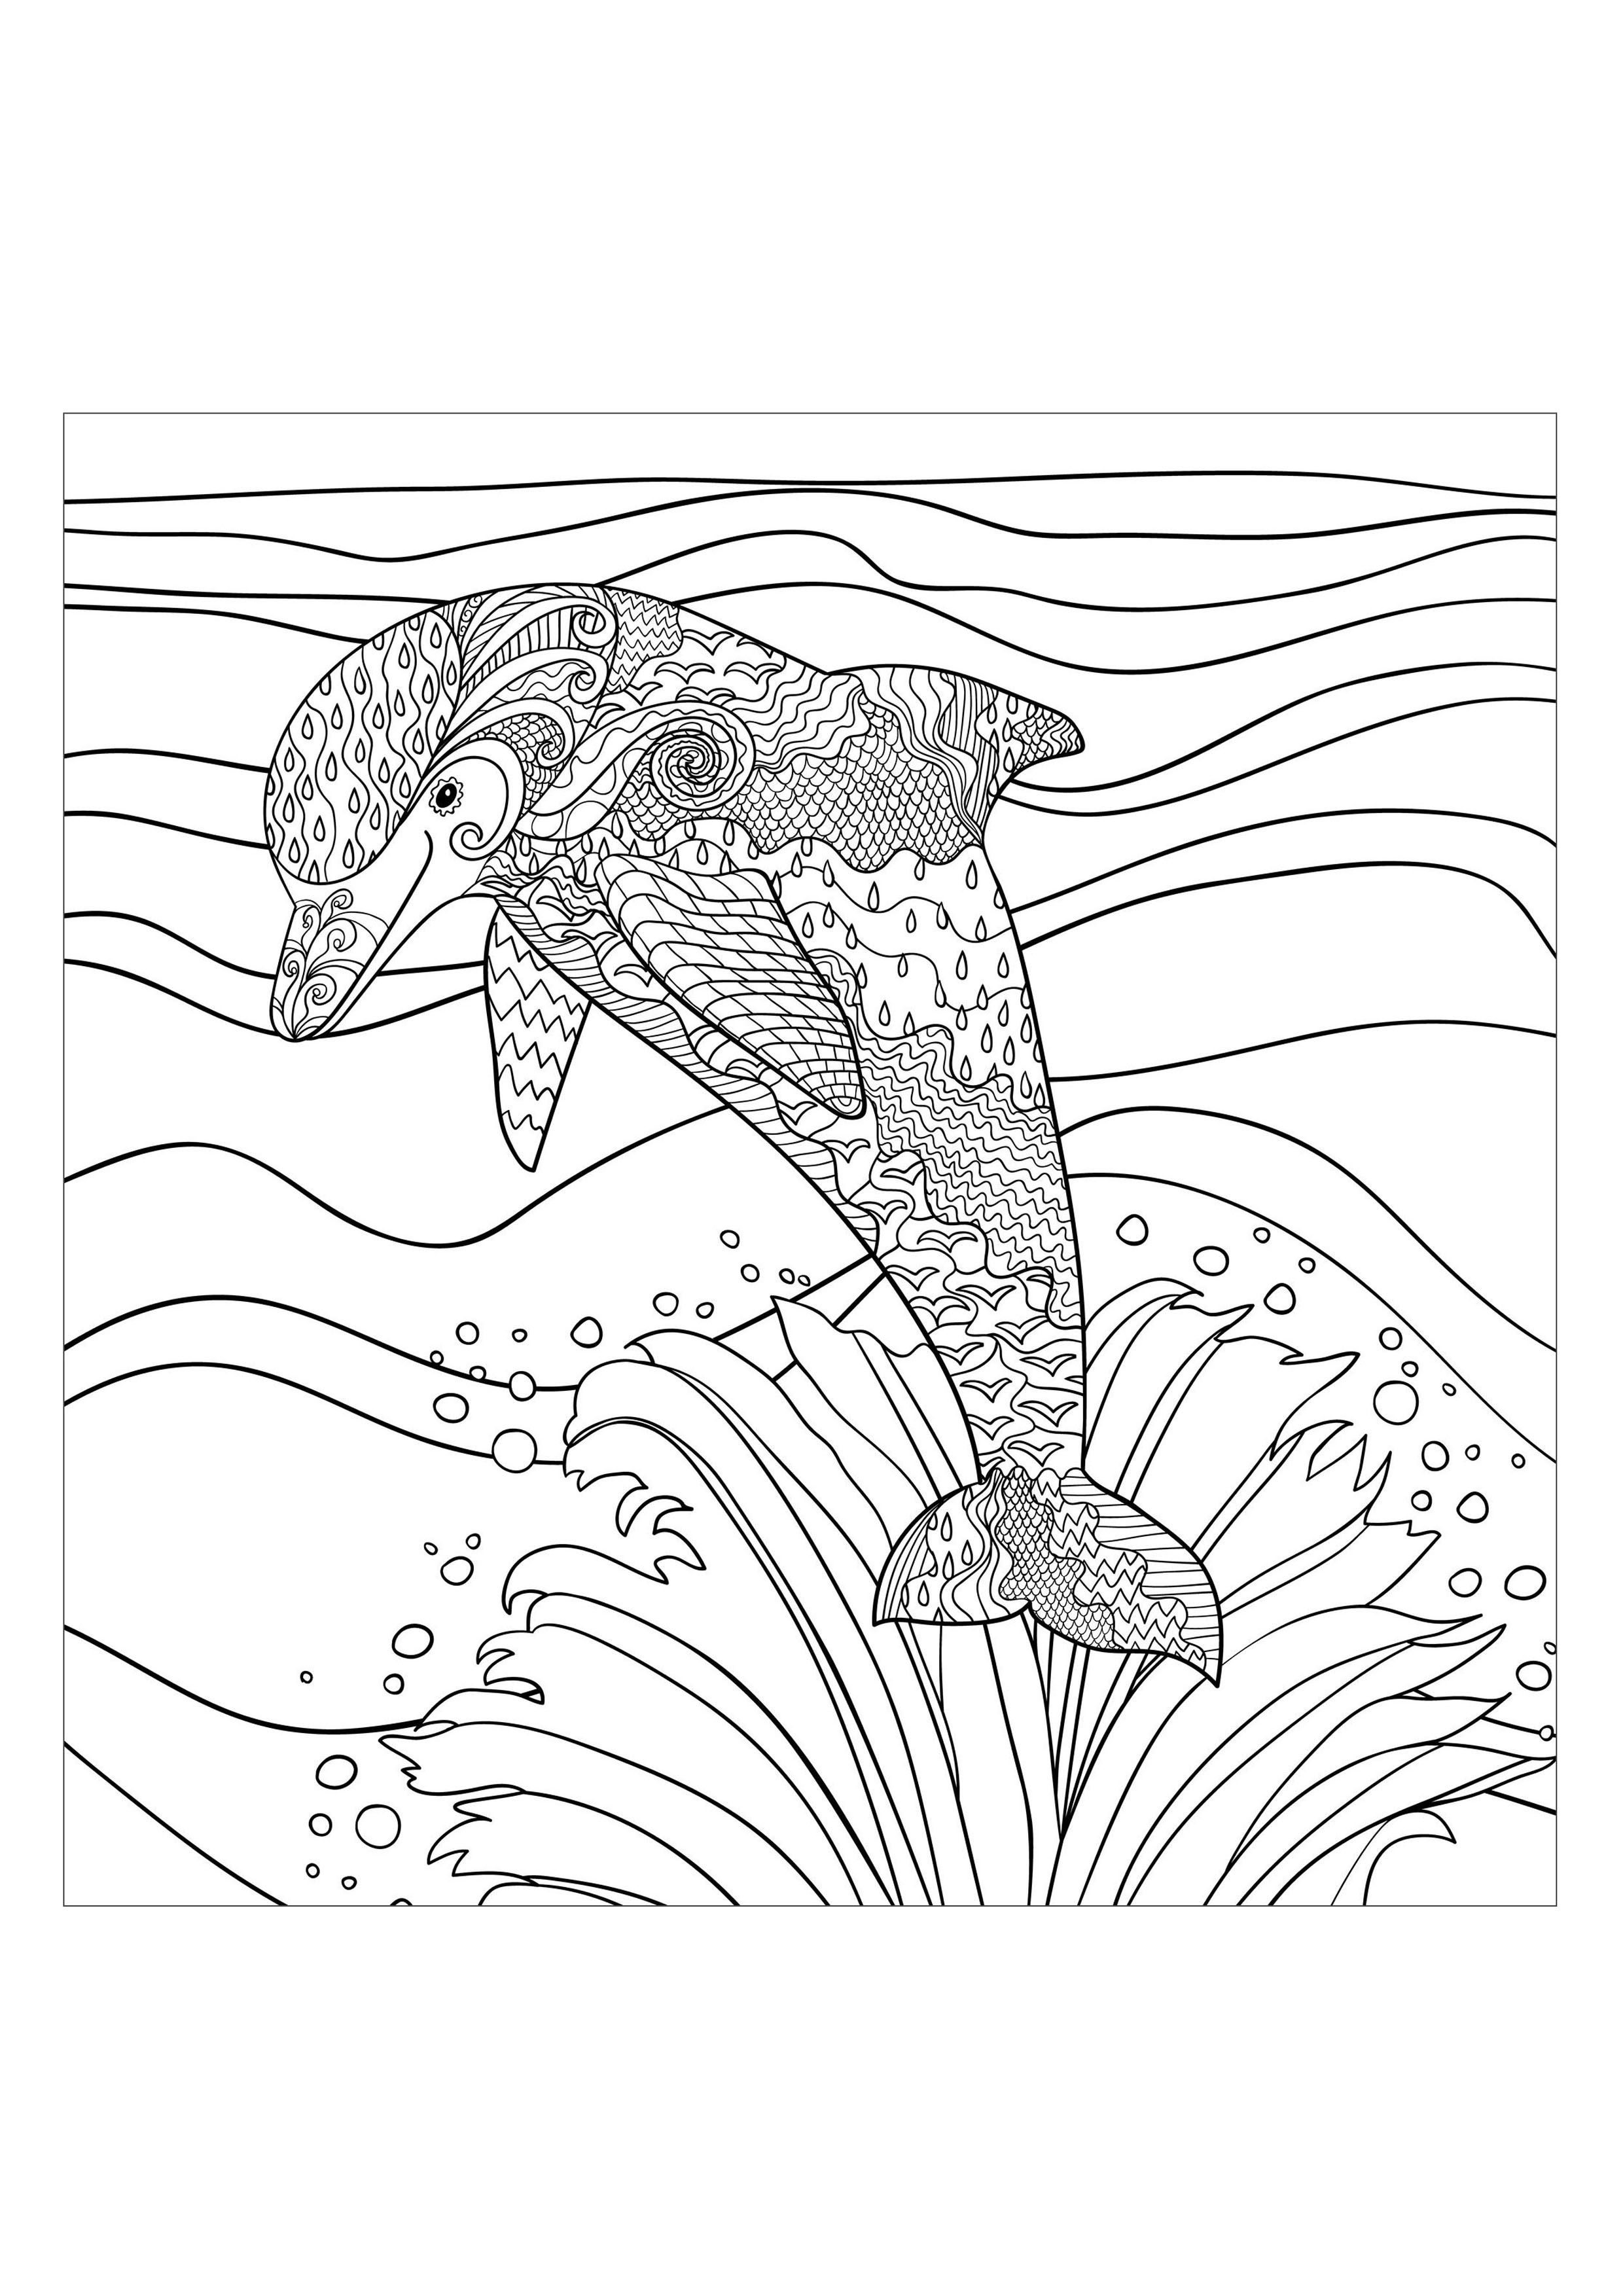 Water worlds - Coloring Pages for adults : coloring-page-adults ...